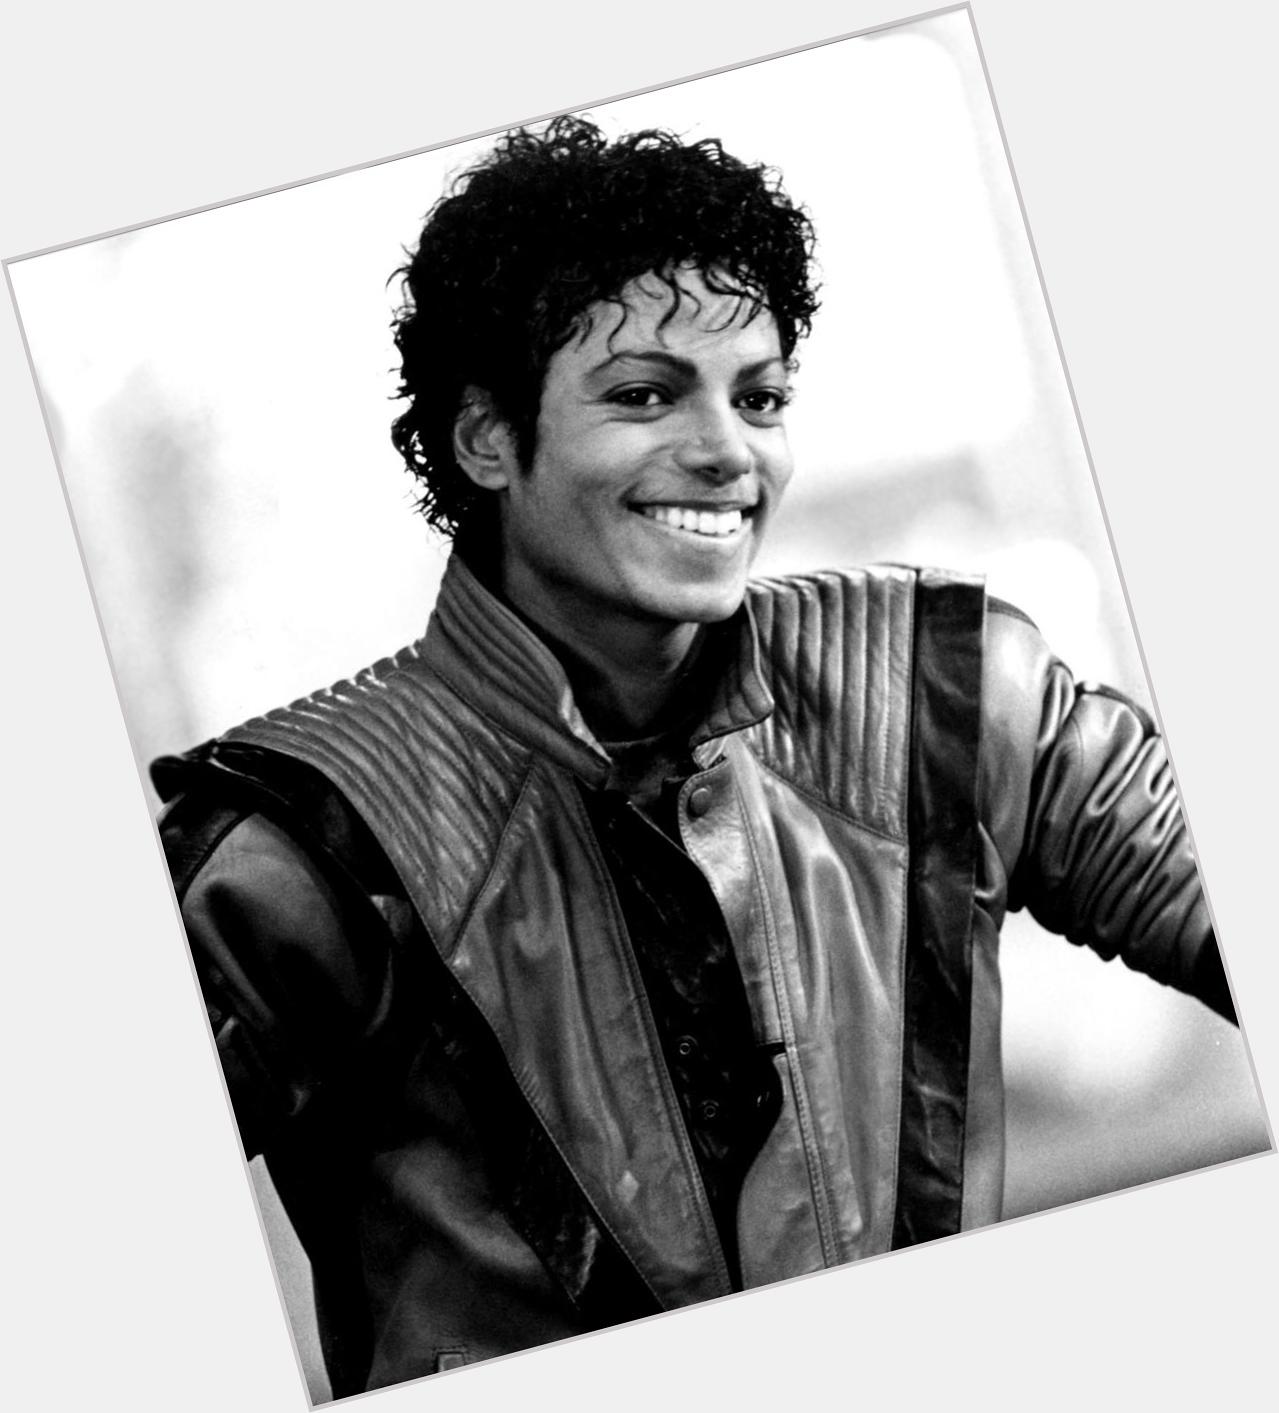 \You are not alone, i am here with you.\ Happy birthday to the king of pop MICHAEL JACKSON 